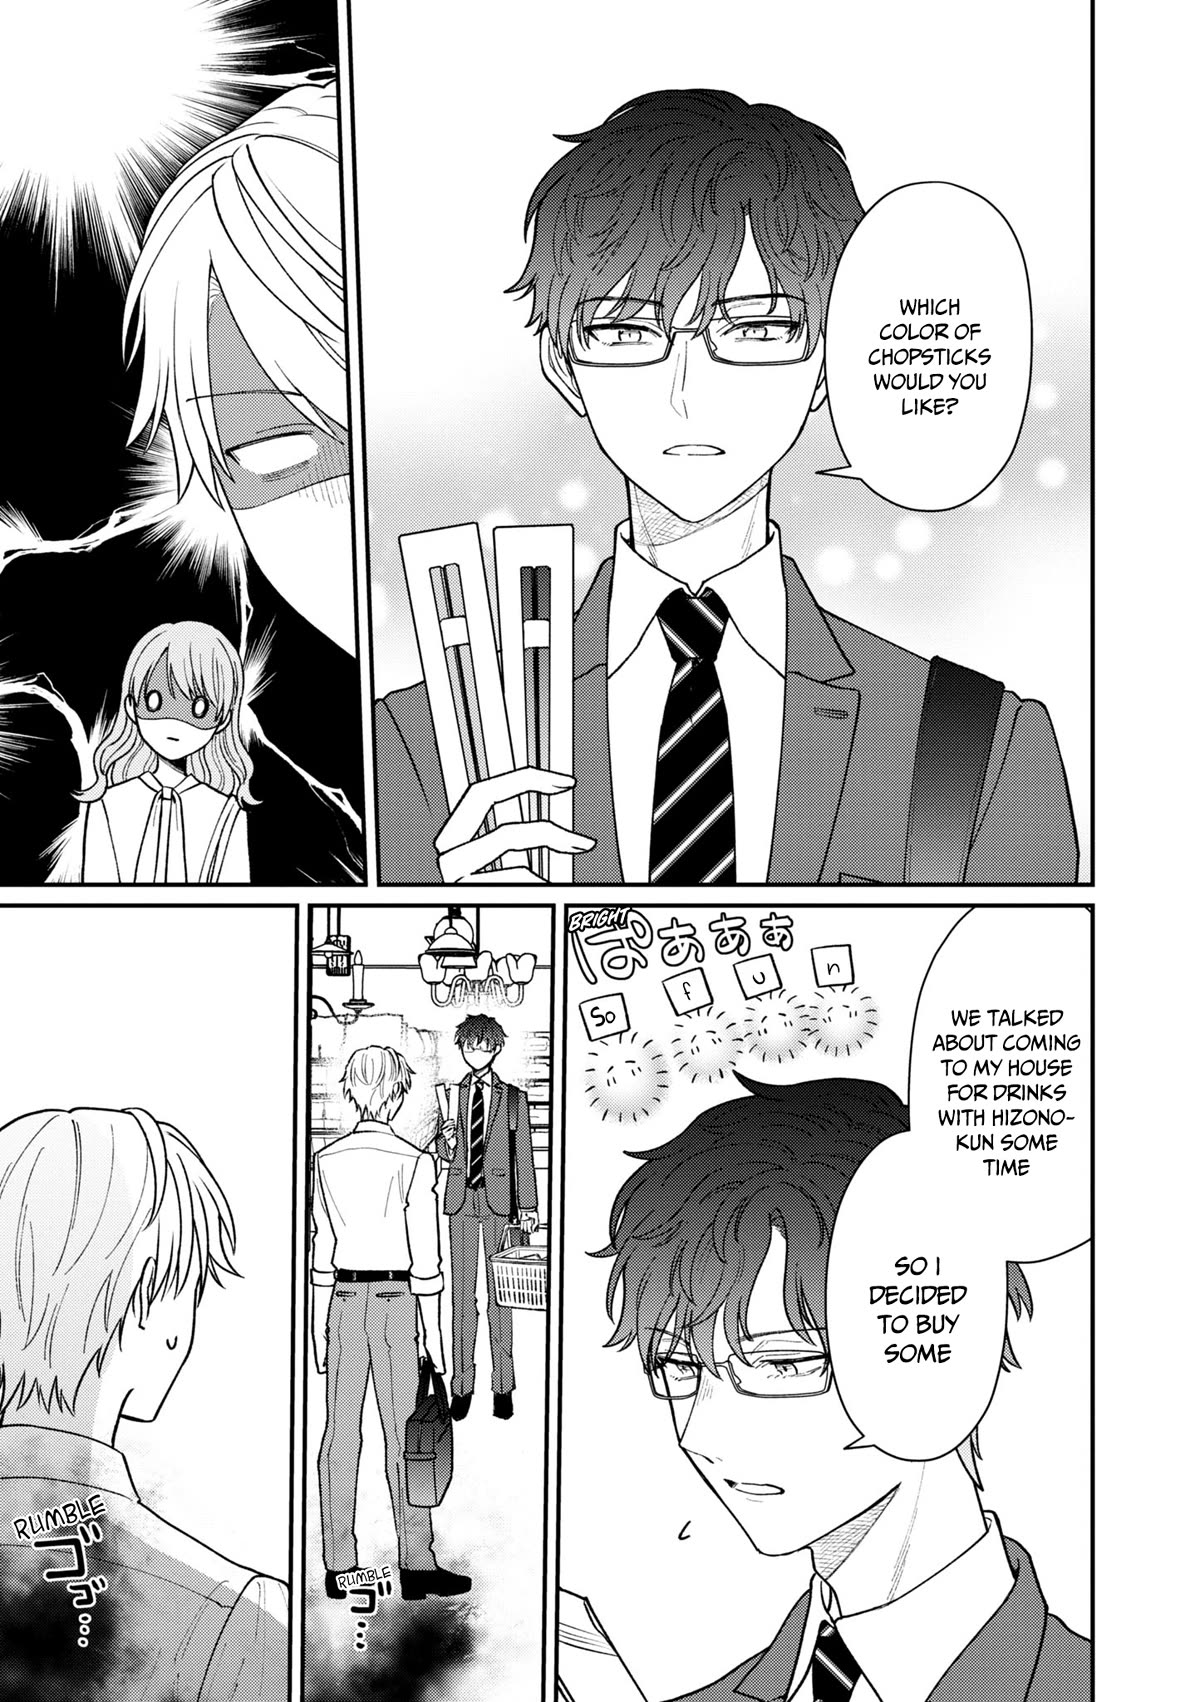 The New-Hire Who Could "Read" Emotions and the Unsociable Senpai - chapter 32.5 - #6